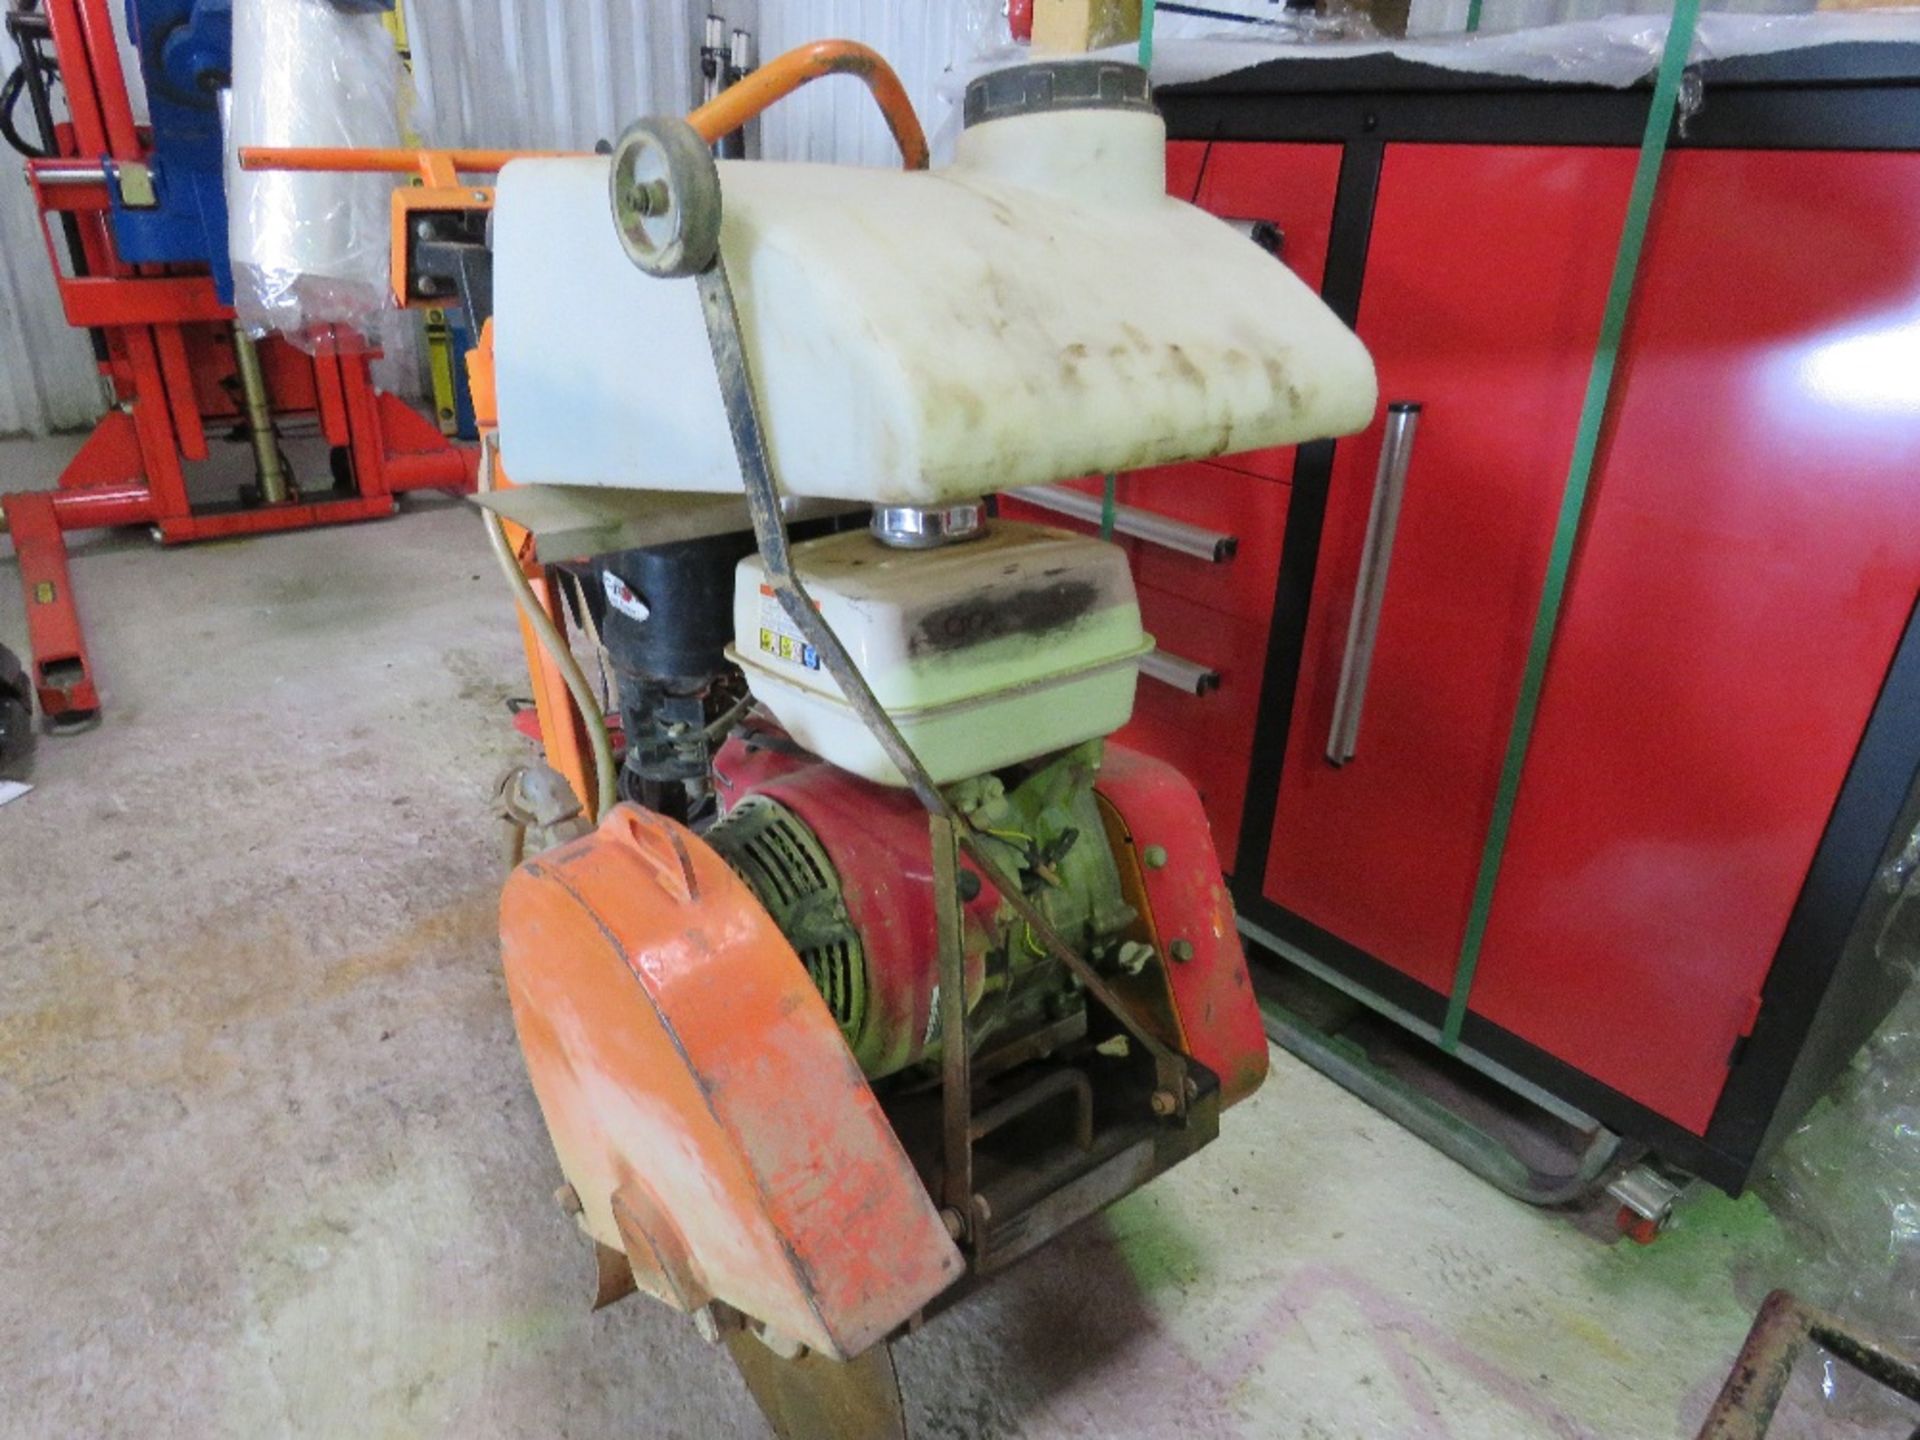 CLIPPER PETROL ENGINED FLOOR SAW WITH TANK AND BLADE. THIS LOT IS SOLD UNDER THE AUCTIONEERS MARGIN - Image 2 of 4